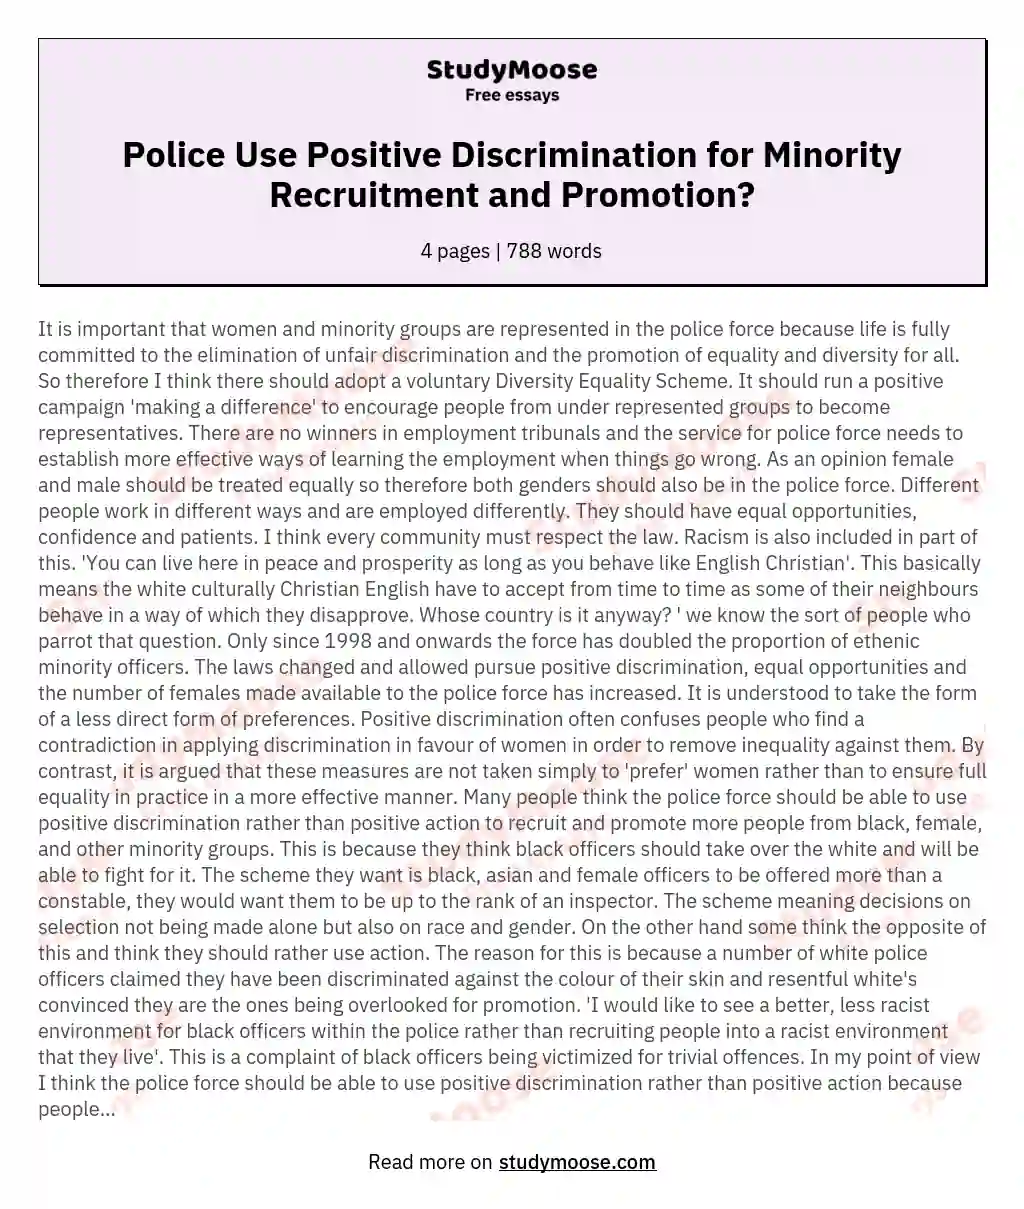 Police Use Positive Discrimination for Minority Recruitment and Promotion? essay